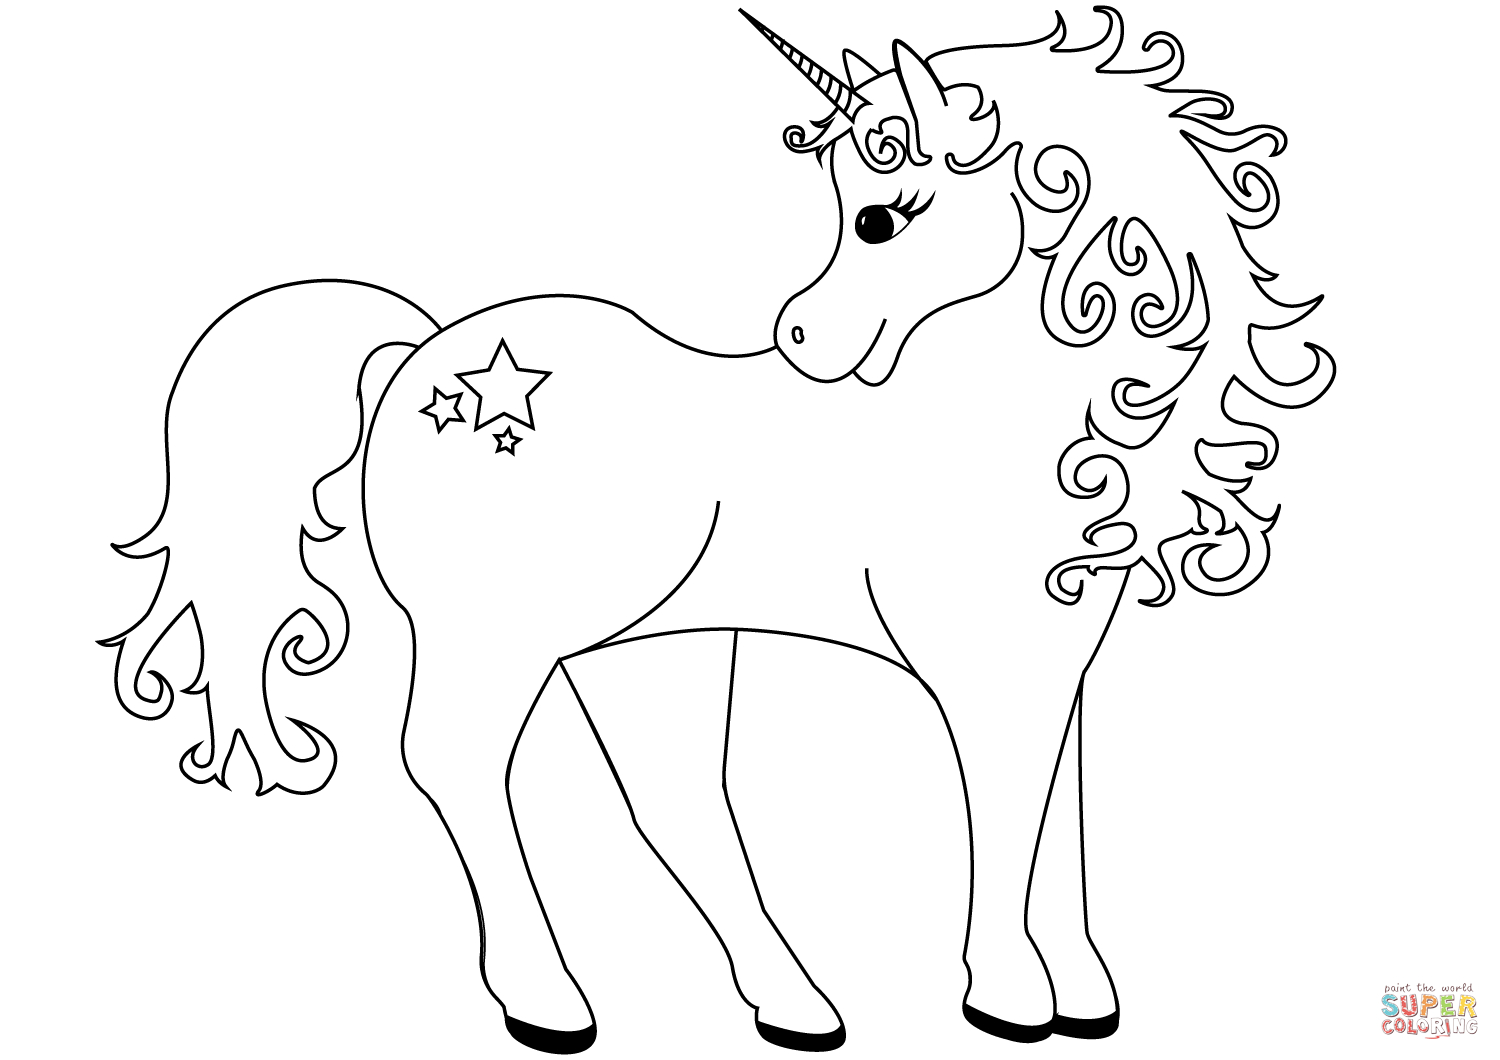 Unicorn Coloring Pages Online Lovely Unicorn Coloring Page Free Printable Coloring Pages